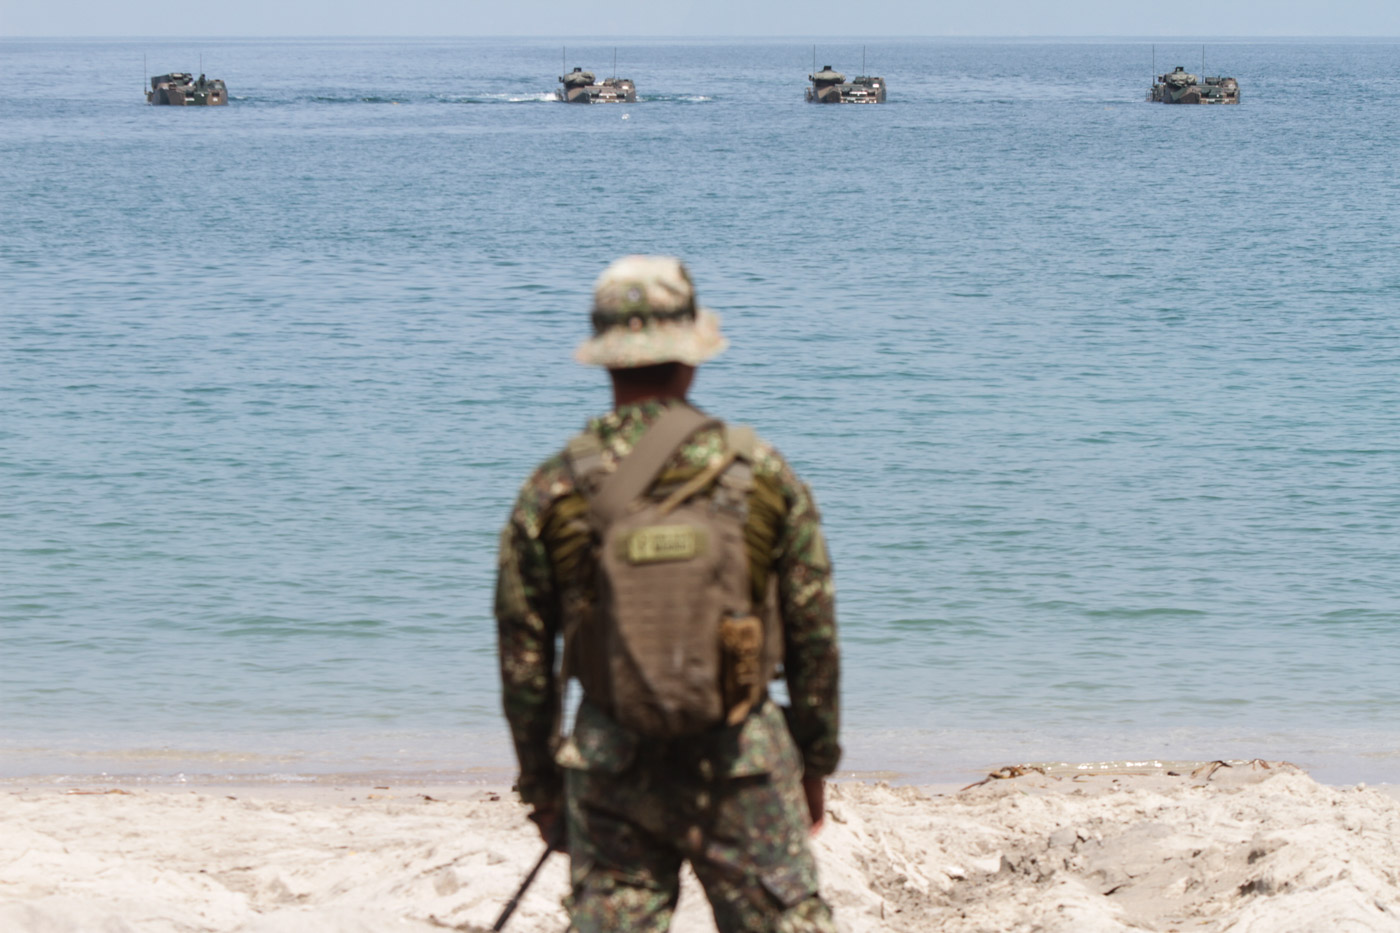 JOINT DRILLS. A Philippine Marine soldier watches as amphibious assault vehicles approach the beach in Ternate, Cavite, during the 2019 Kamandag joint exercises with the US. Photo by Lito Borras/Rappler 